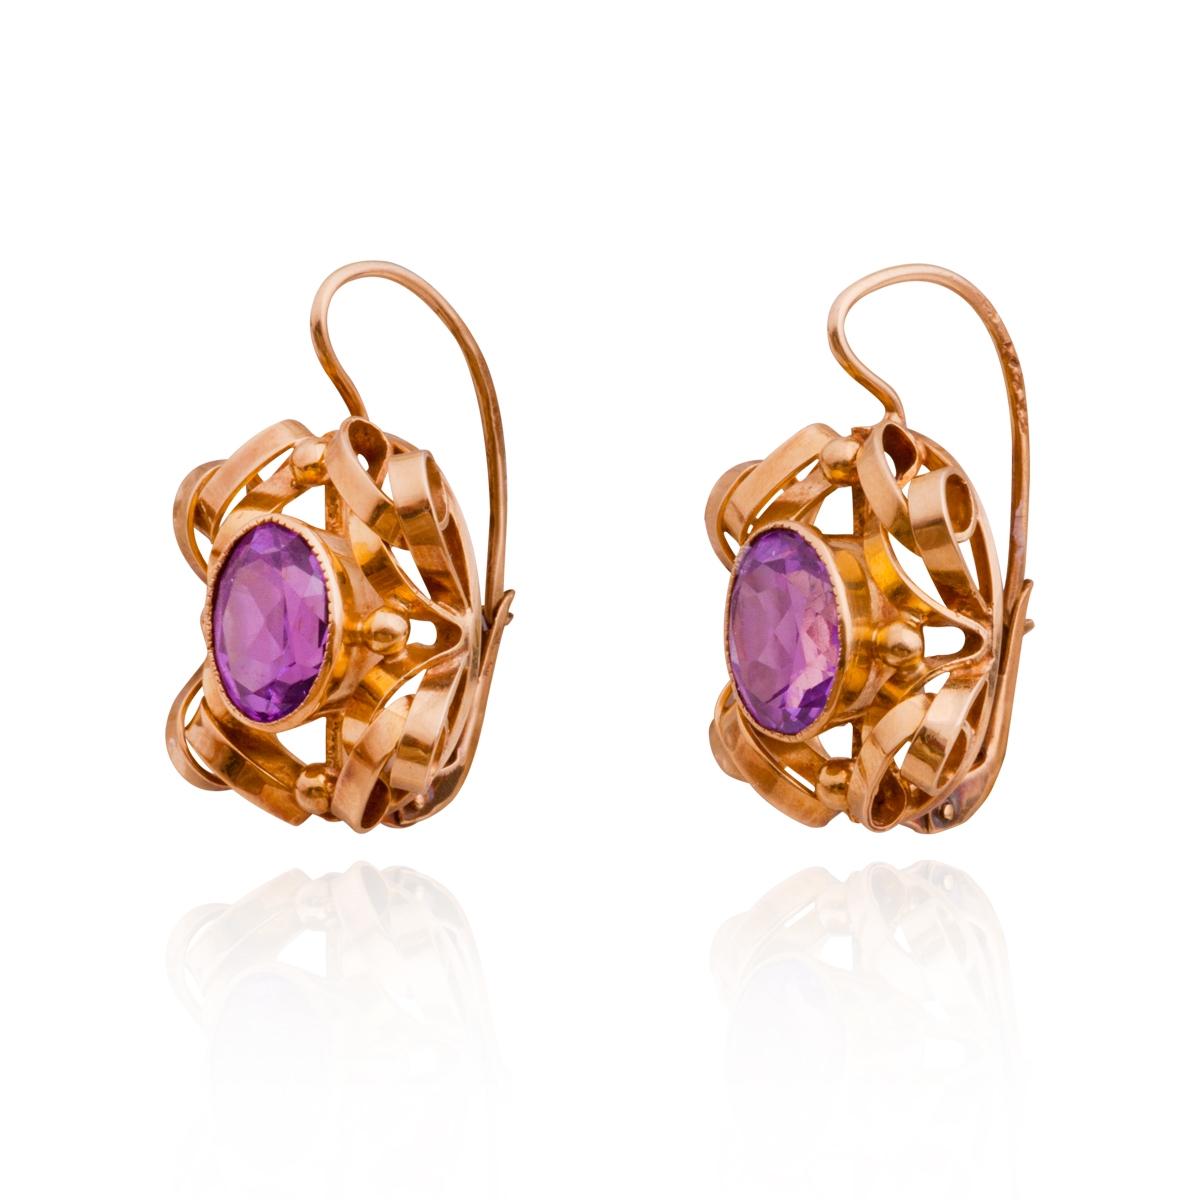 Pair of vintage 14 karat gold amethyst earrings, 1960s. The earrings are stamped and are in very good condition.

Year: 1960s
Origin: Czech Republic
Materials: Amethyst, 14 karat gold
Size: Height 2.5 cm x Width 1.5 cm
Condition: The earrings are in